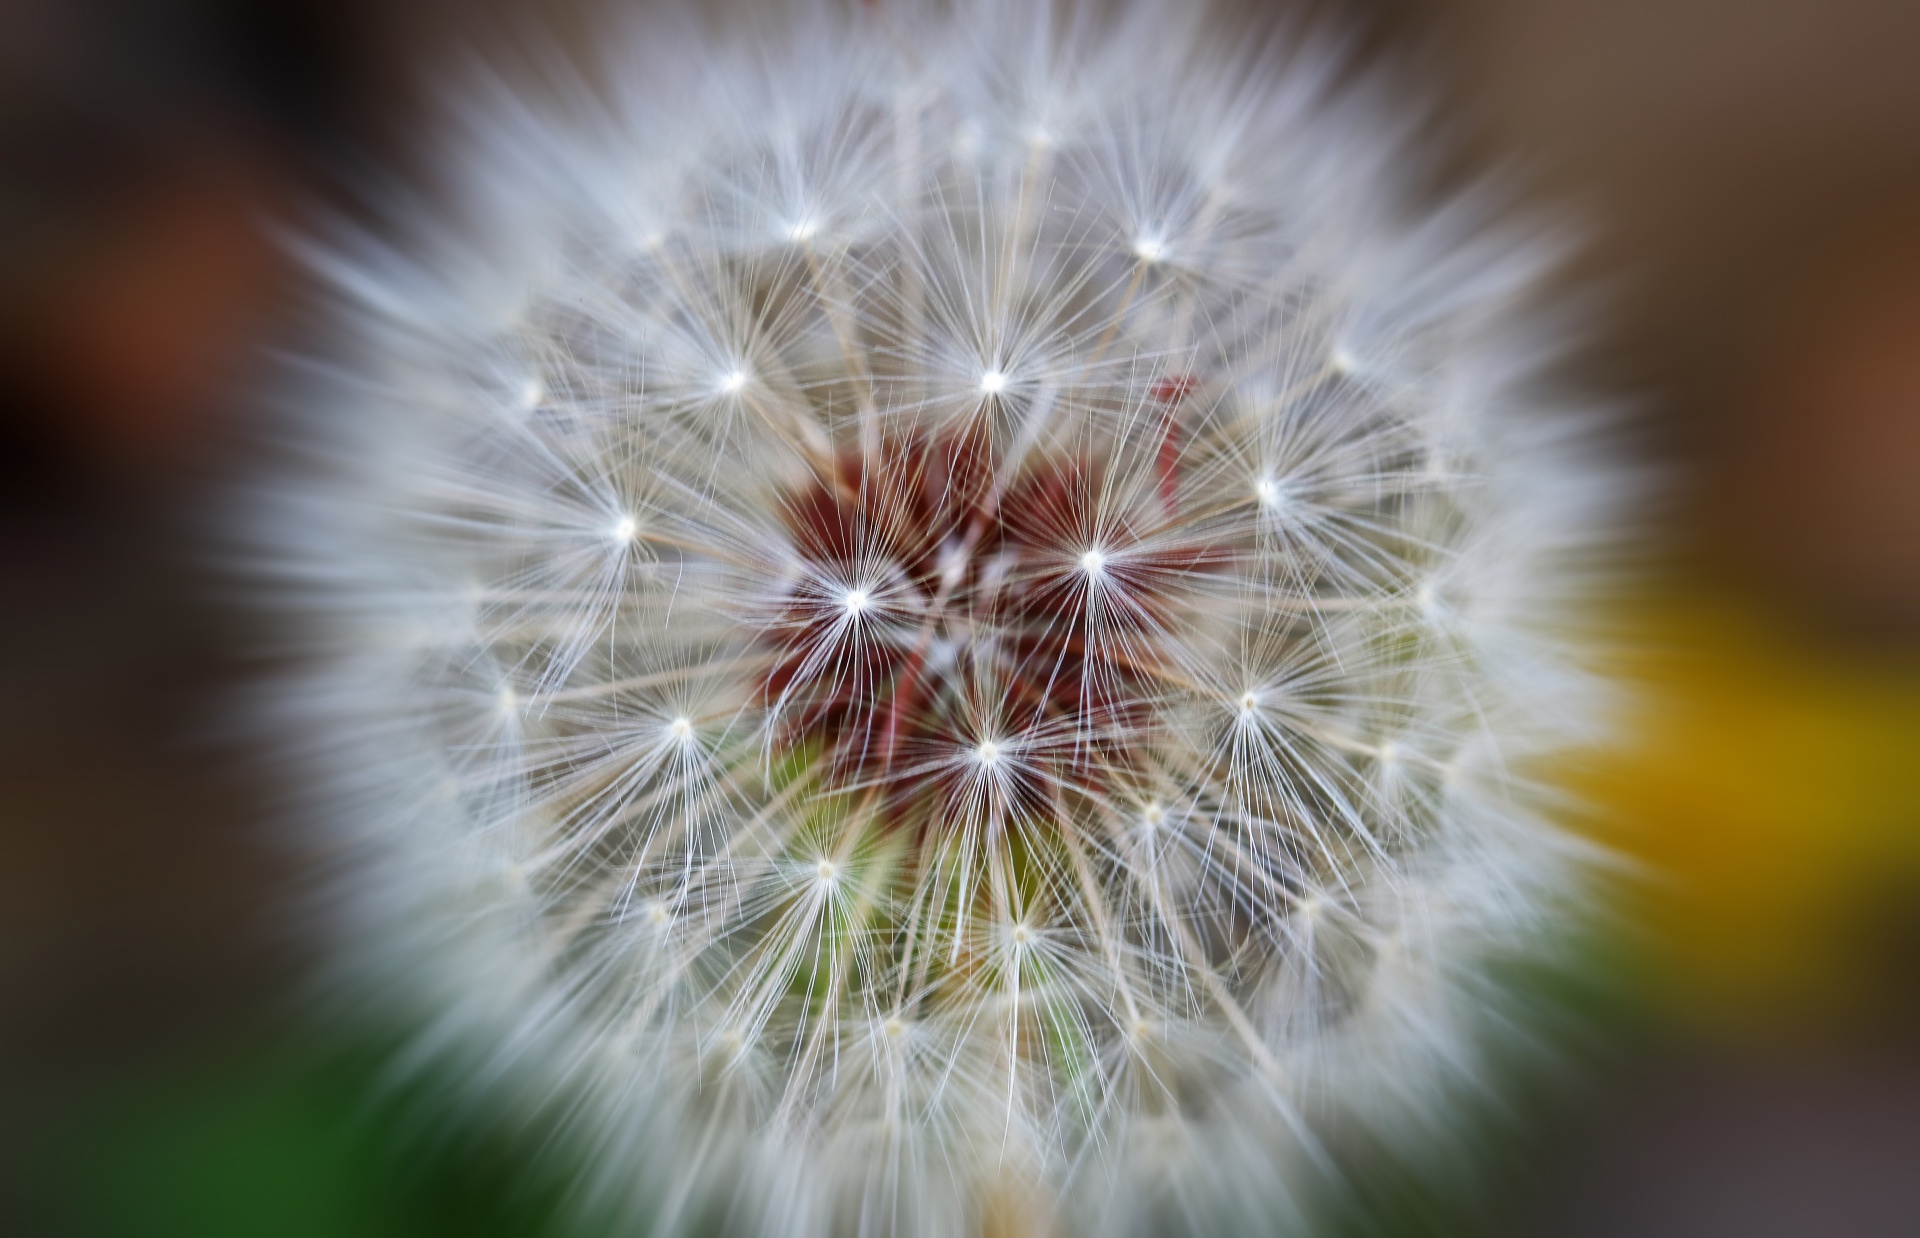 focus area added to zoom burst effect on a dandelion seed head